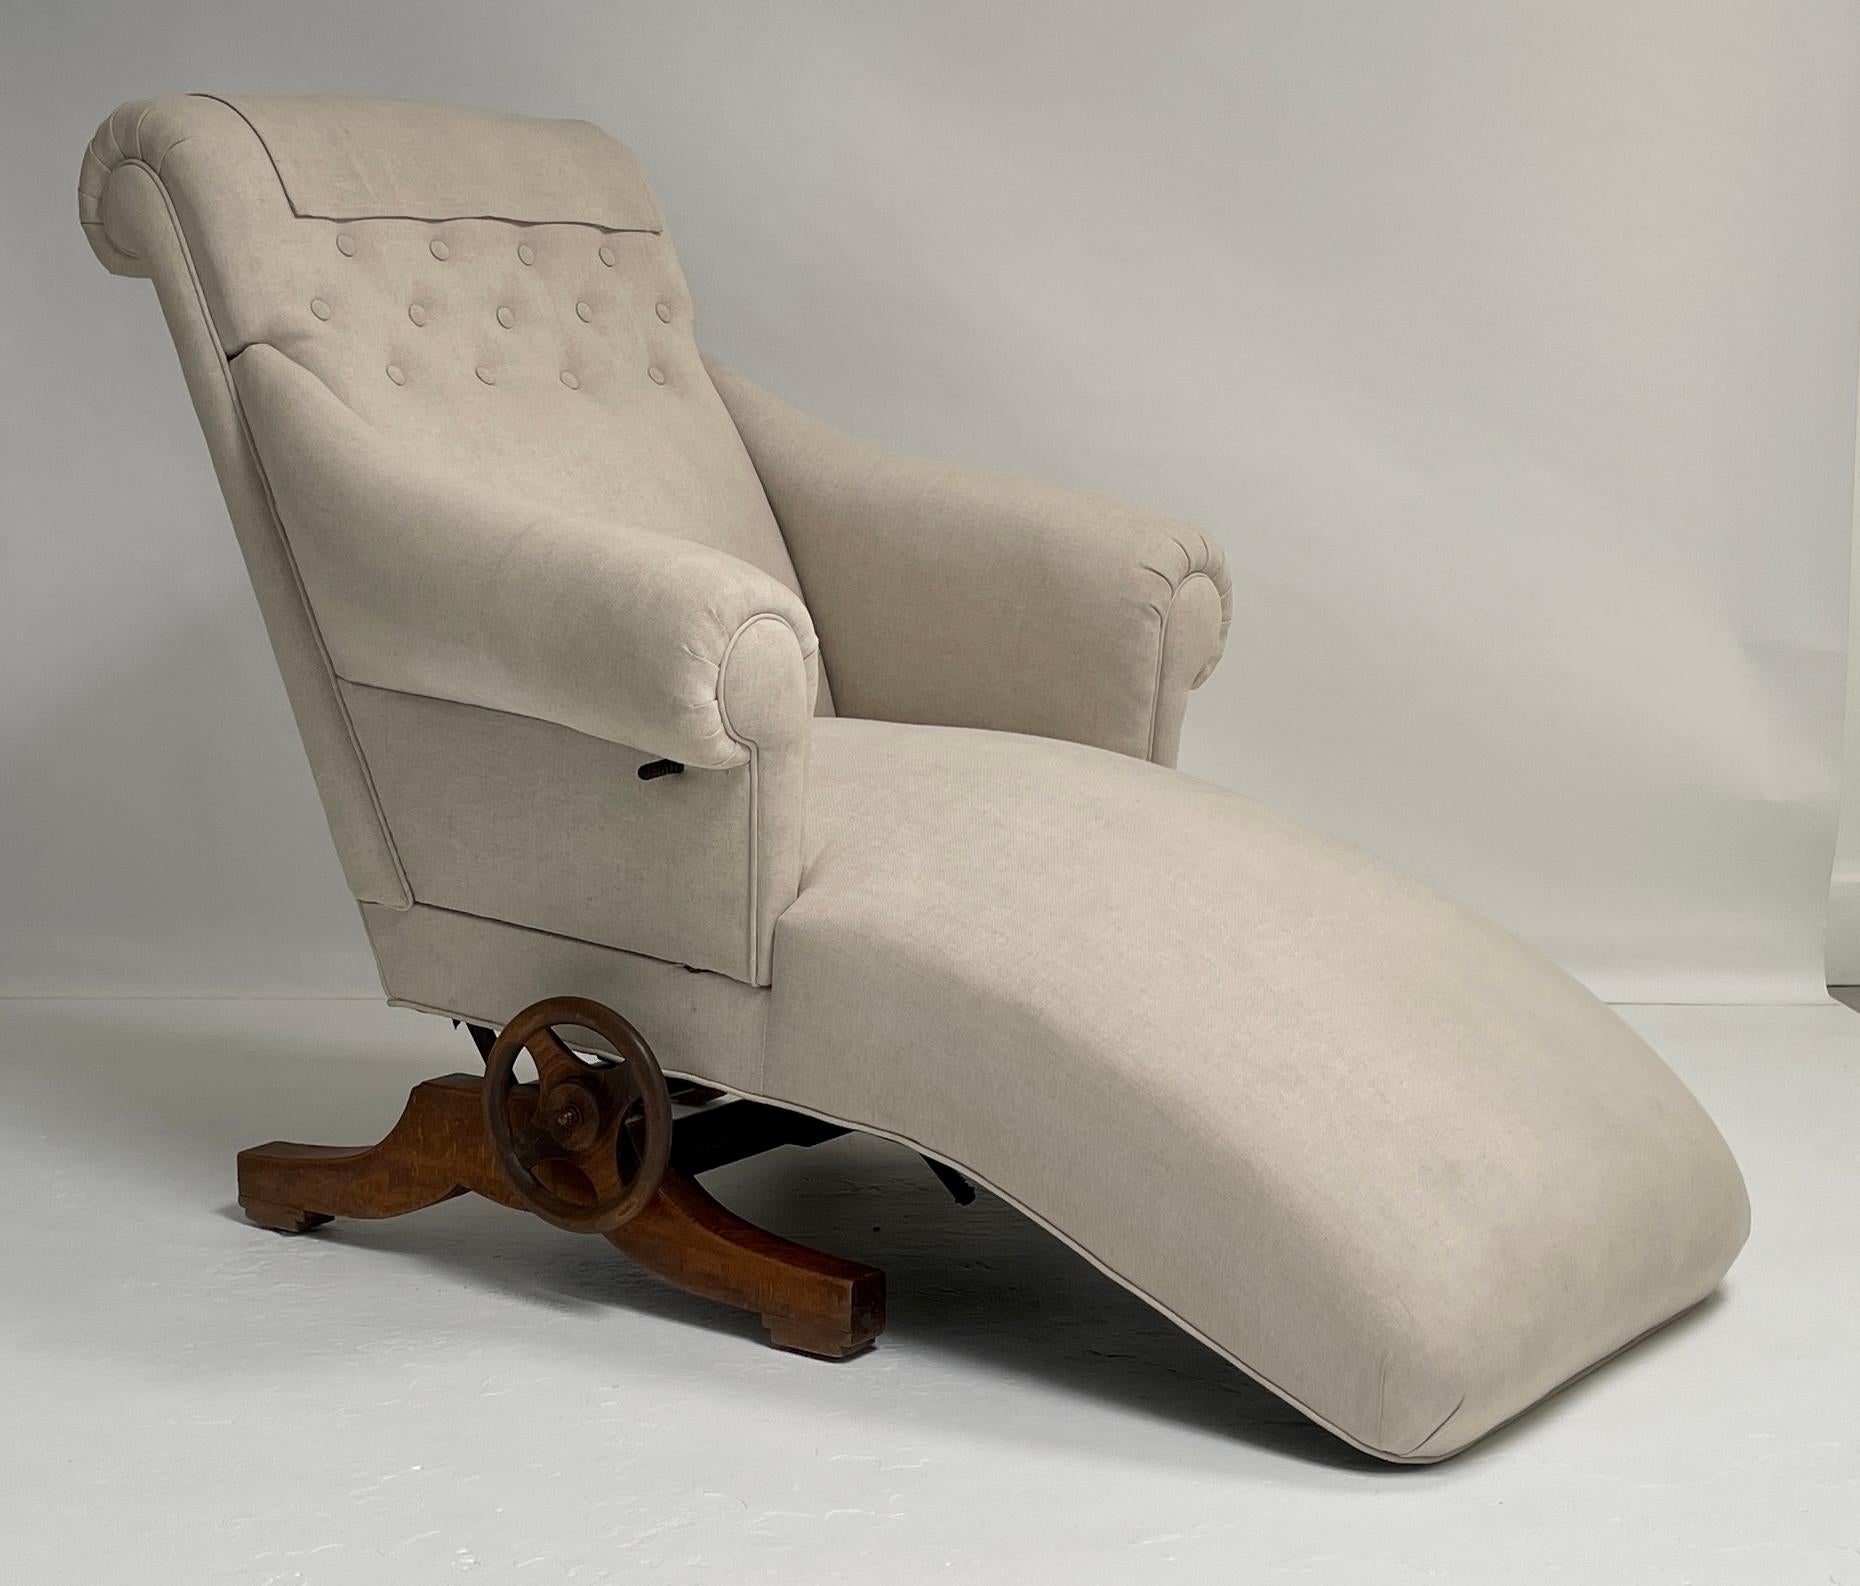 Unique find! Very comfortable reclining chaise lounge. Great vintage detailing in the mechanism to recline the seat. The arm swings out for easy access. Completely restored, newly upholstered.